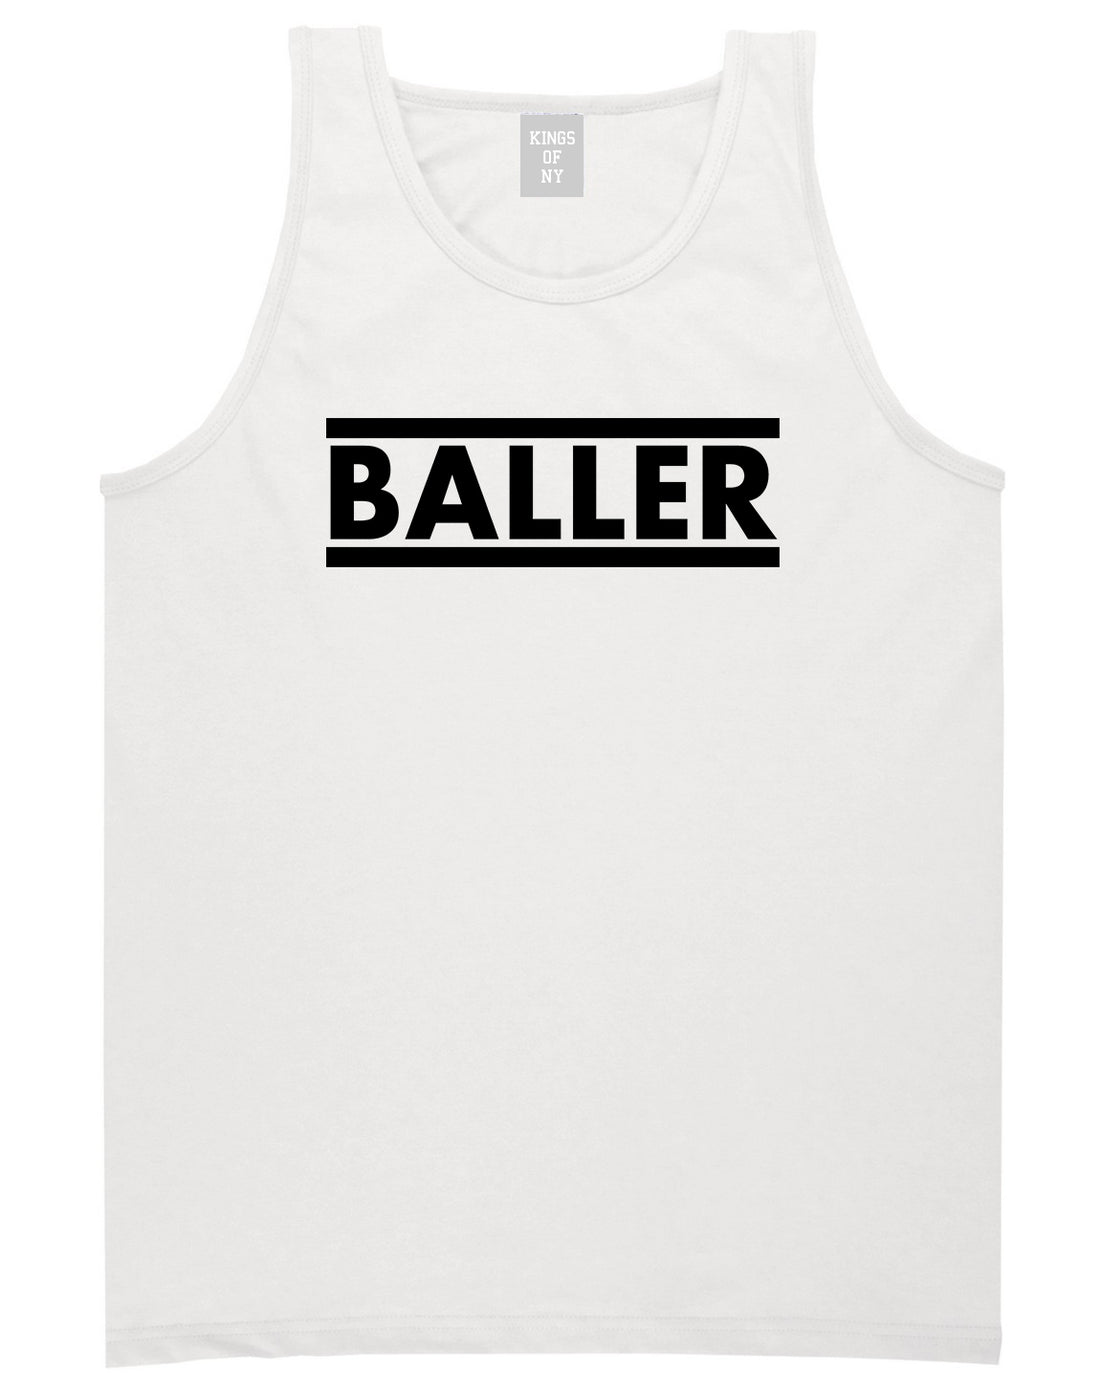 Baller White Tank Top Shirt by Kings Of NY